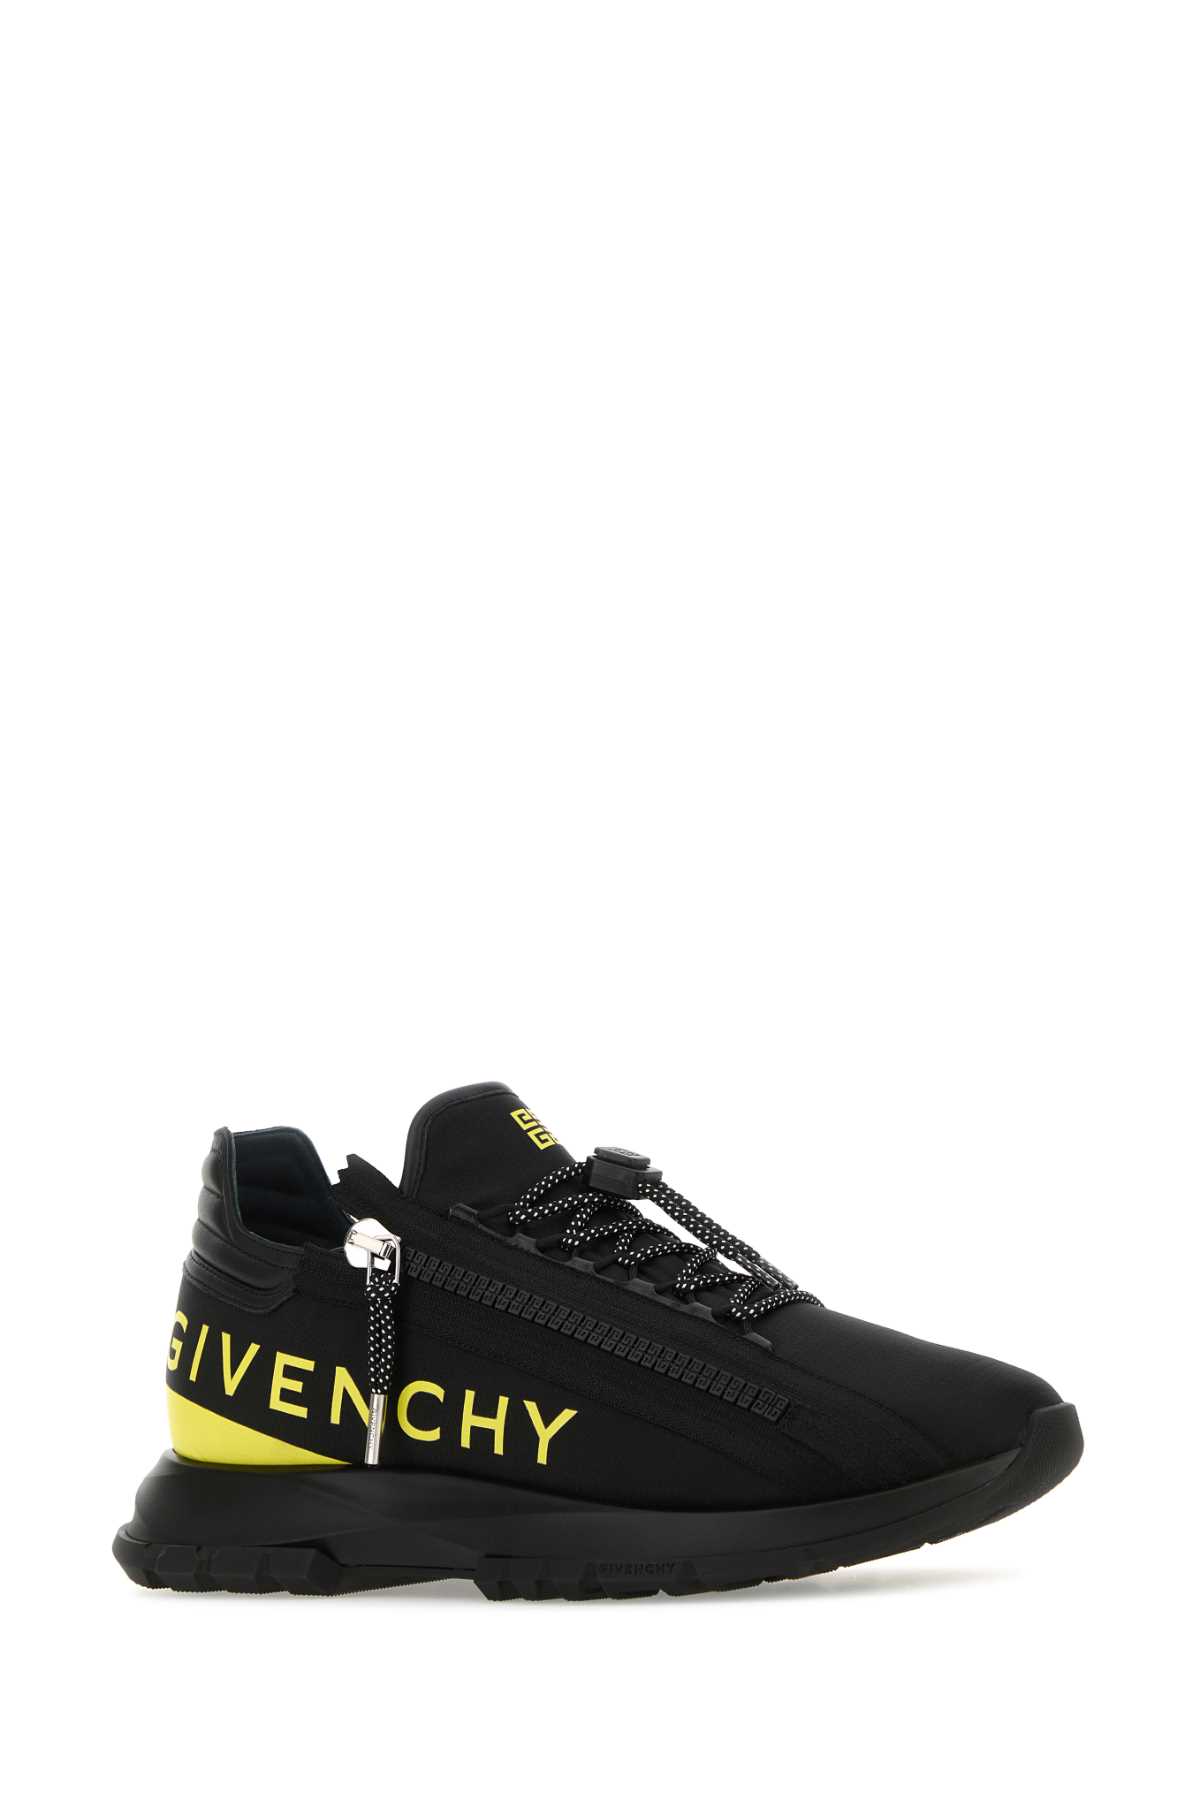 Shop Givenchy Black Fabric Spectre Sneakers In Blackyellow